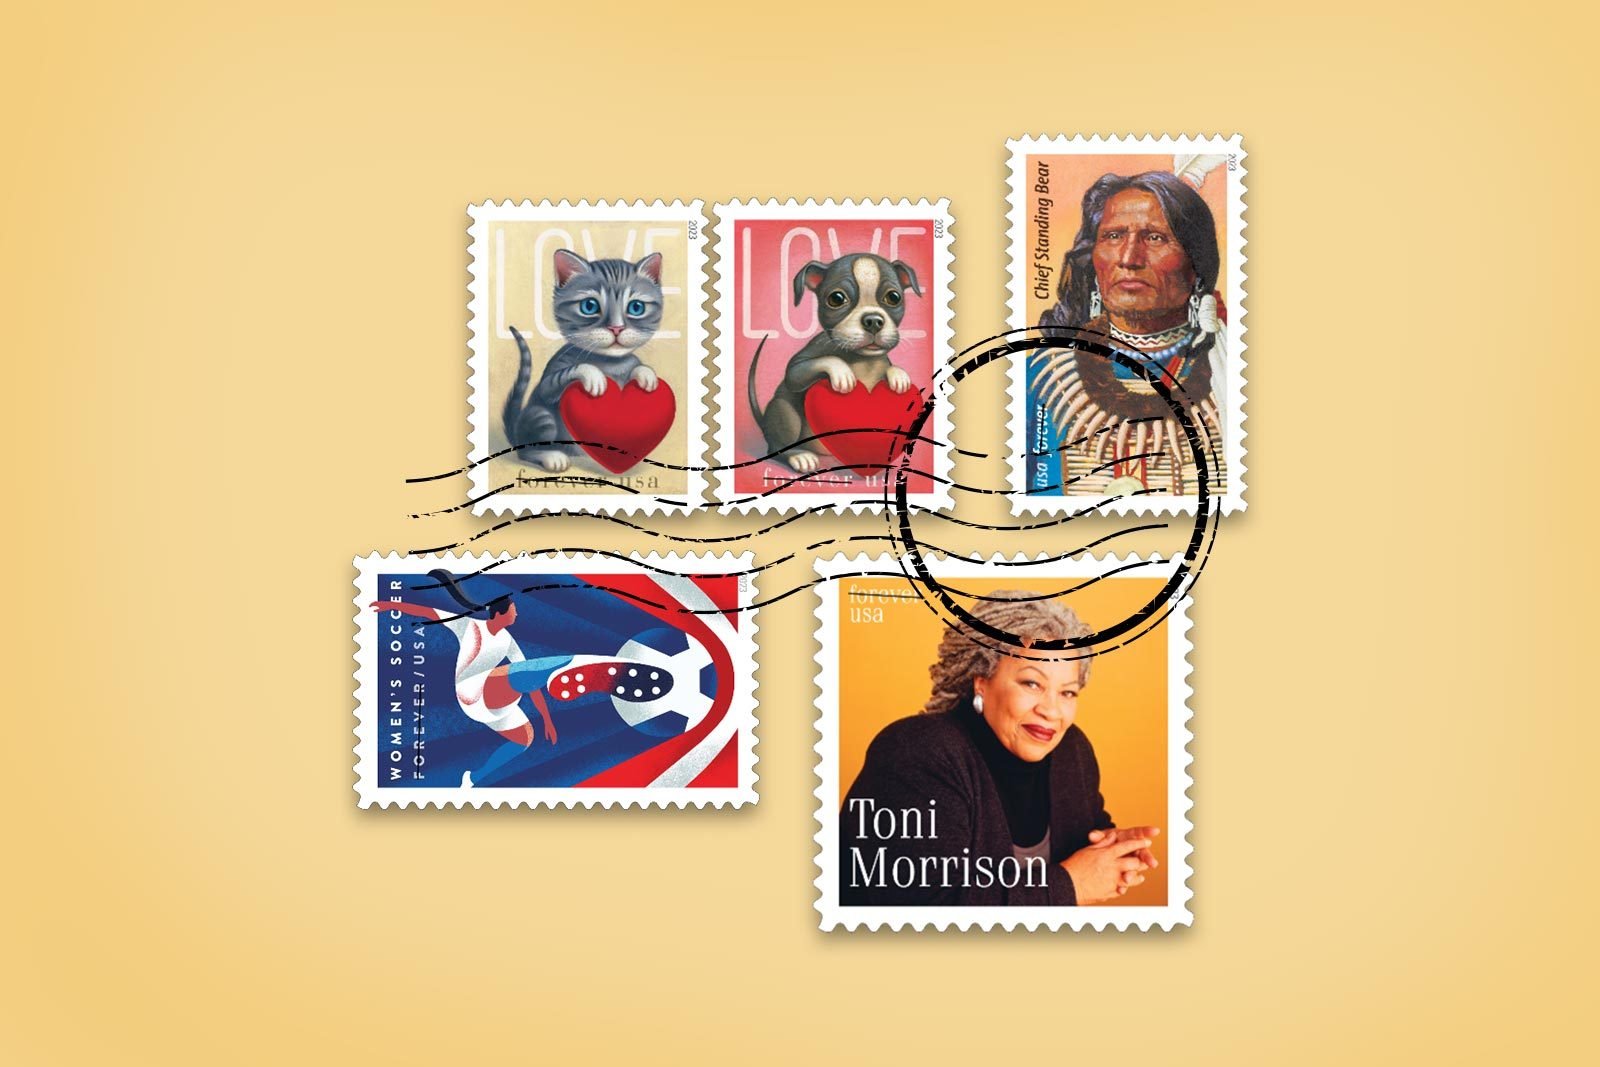 Toni Morrison Appears on Postal Service's Latest Forever Stamp - The New  York Times